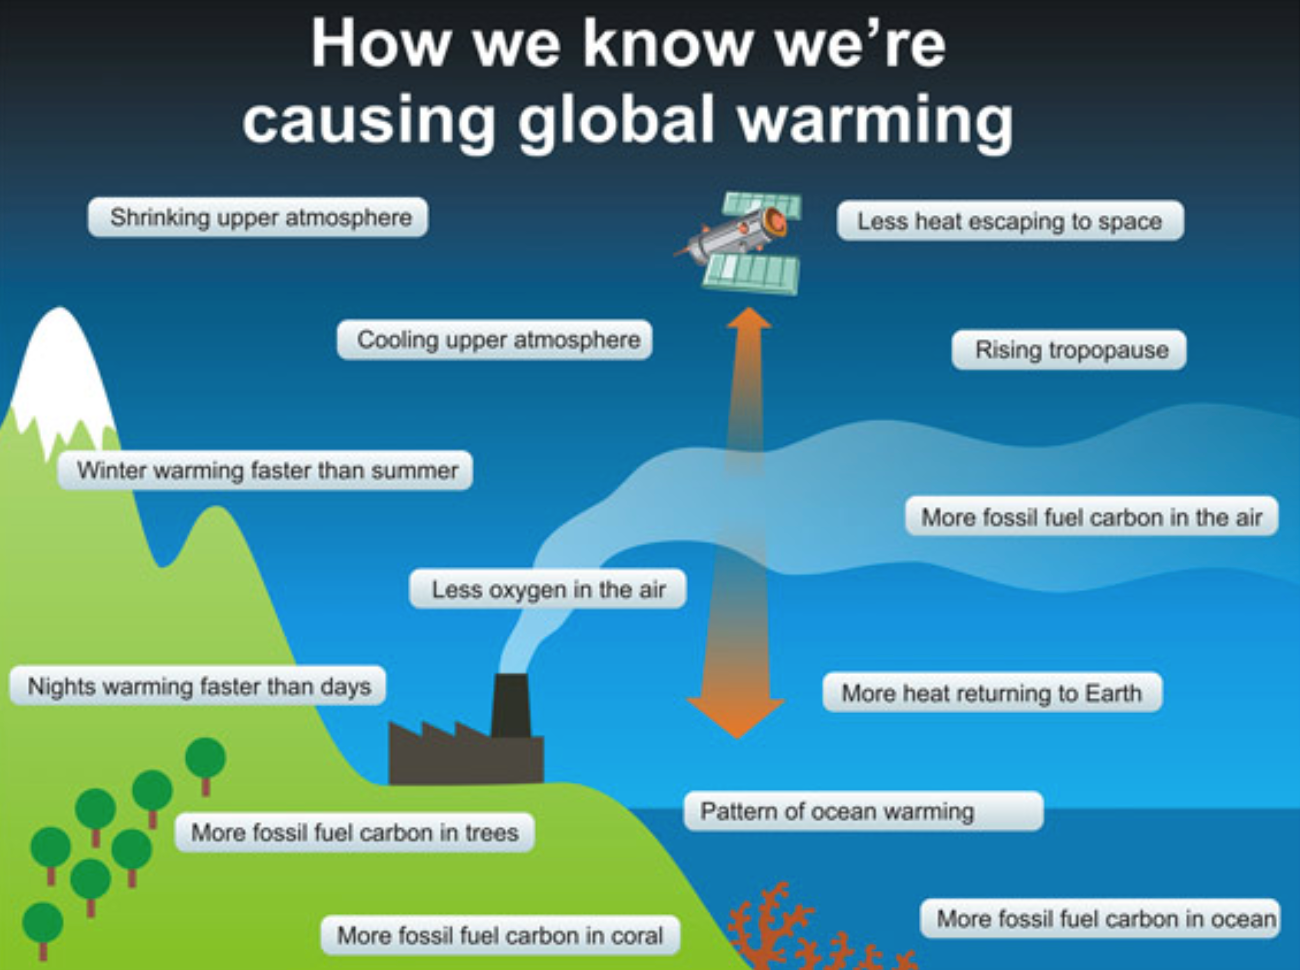 How we know we're causing global warming